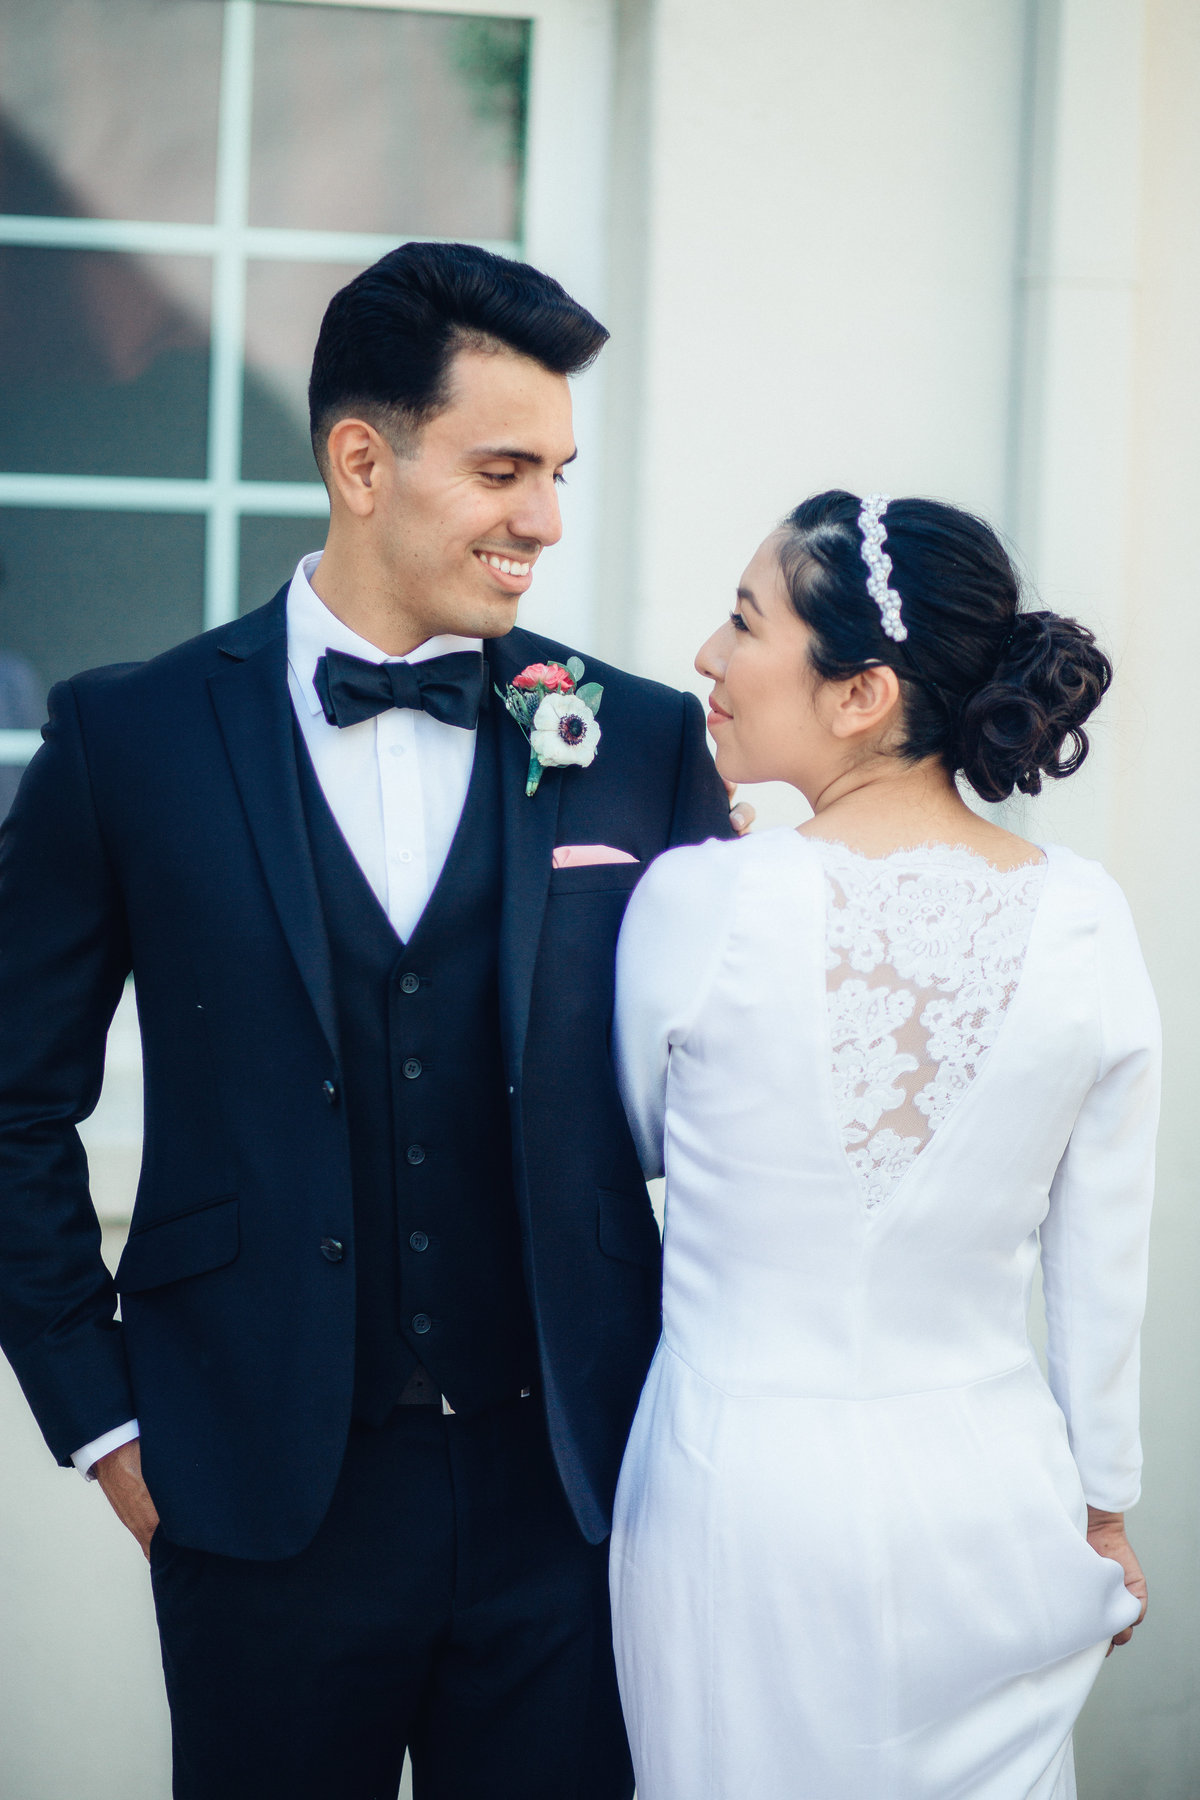 Wedding Photograph Of Bride And Groom Smiling At Each Other Los Angeles